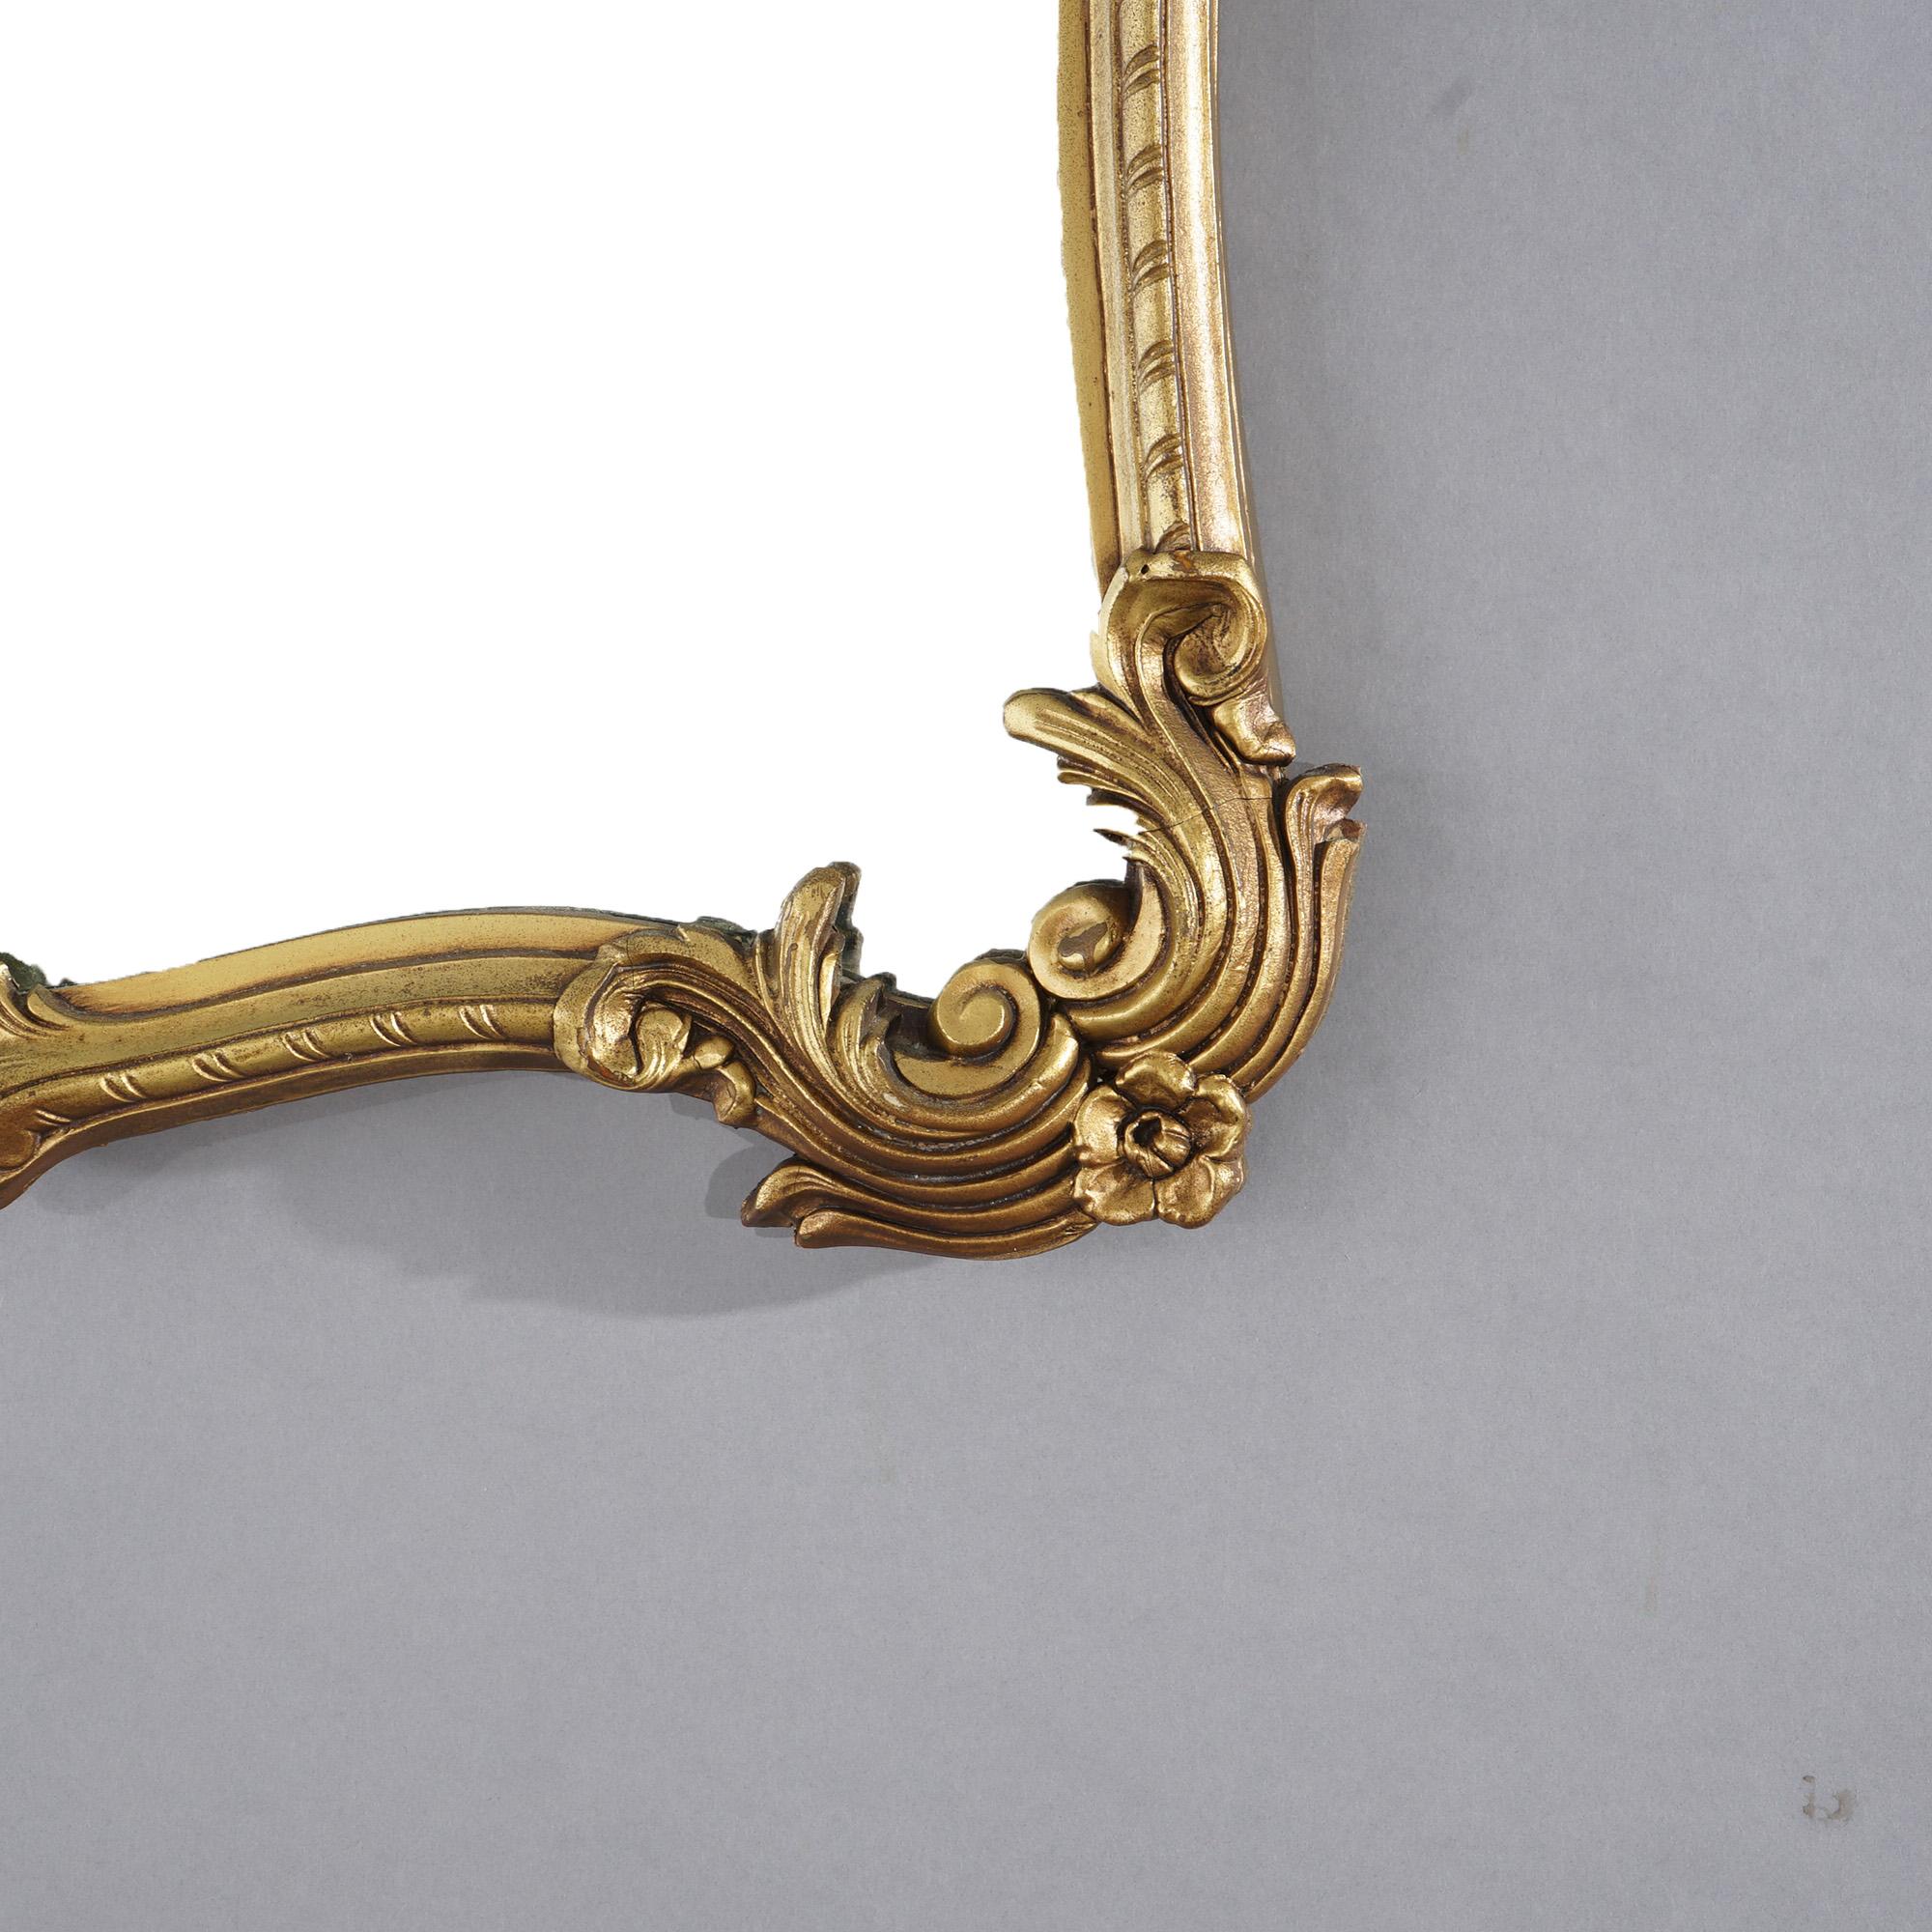 Antique French Giltwood Wall Mirror with Foliate & Gadroon Elements Circa 1930 For Sale 3